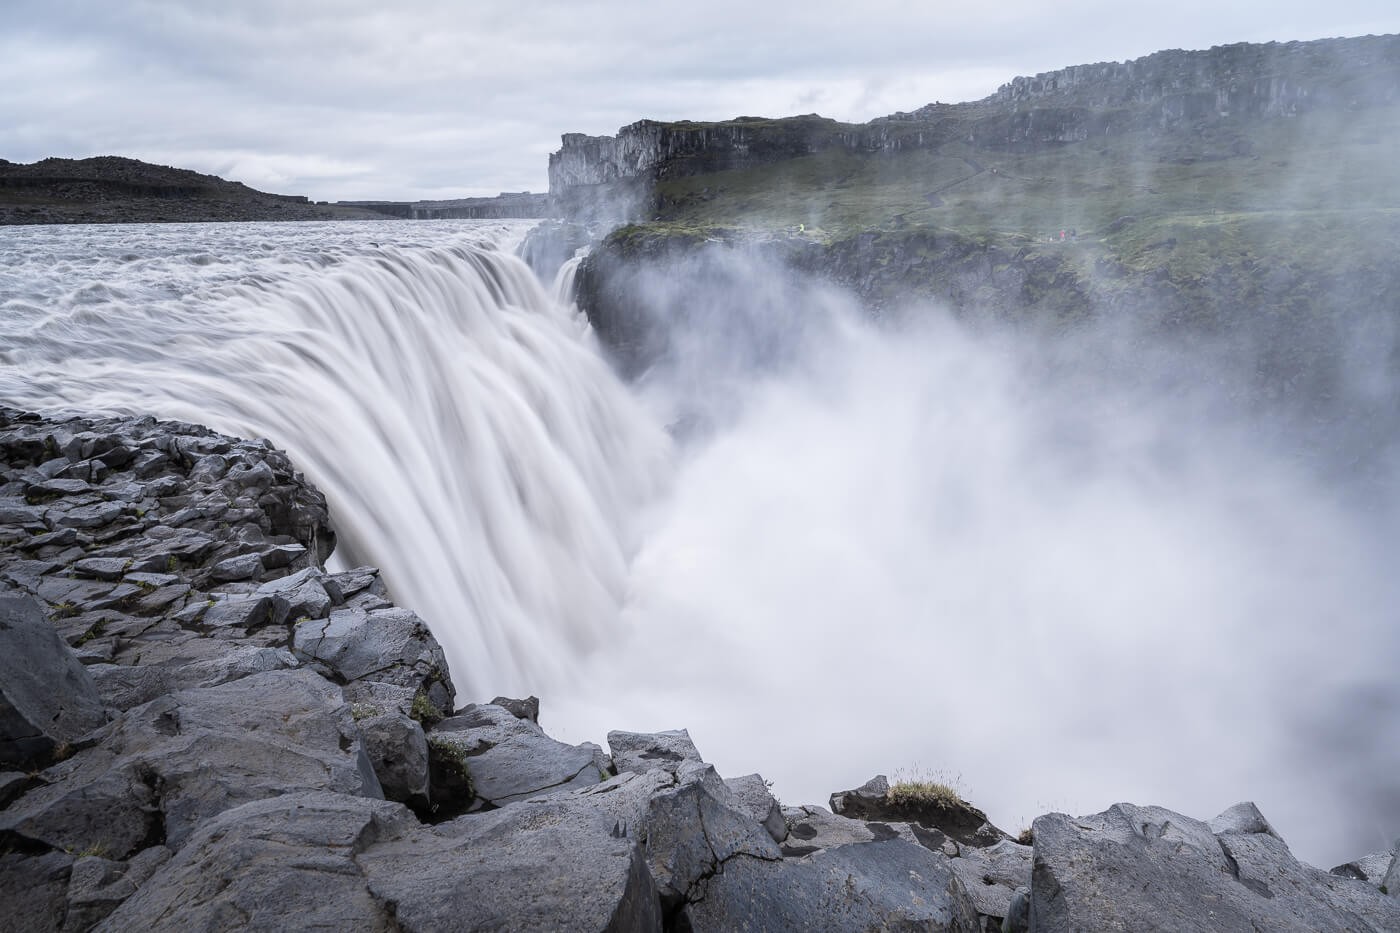 Roaring waters of the Dettifoss Waterfall in North Iceland that can be reached via a short Hike